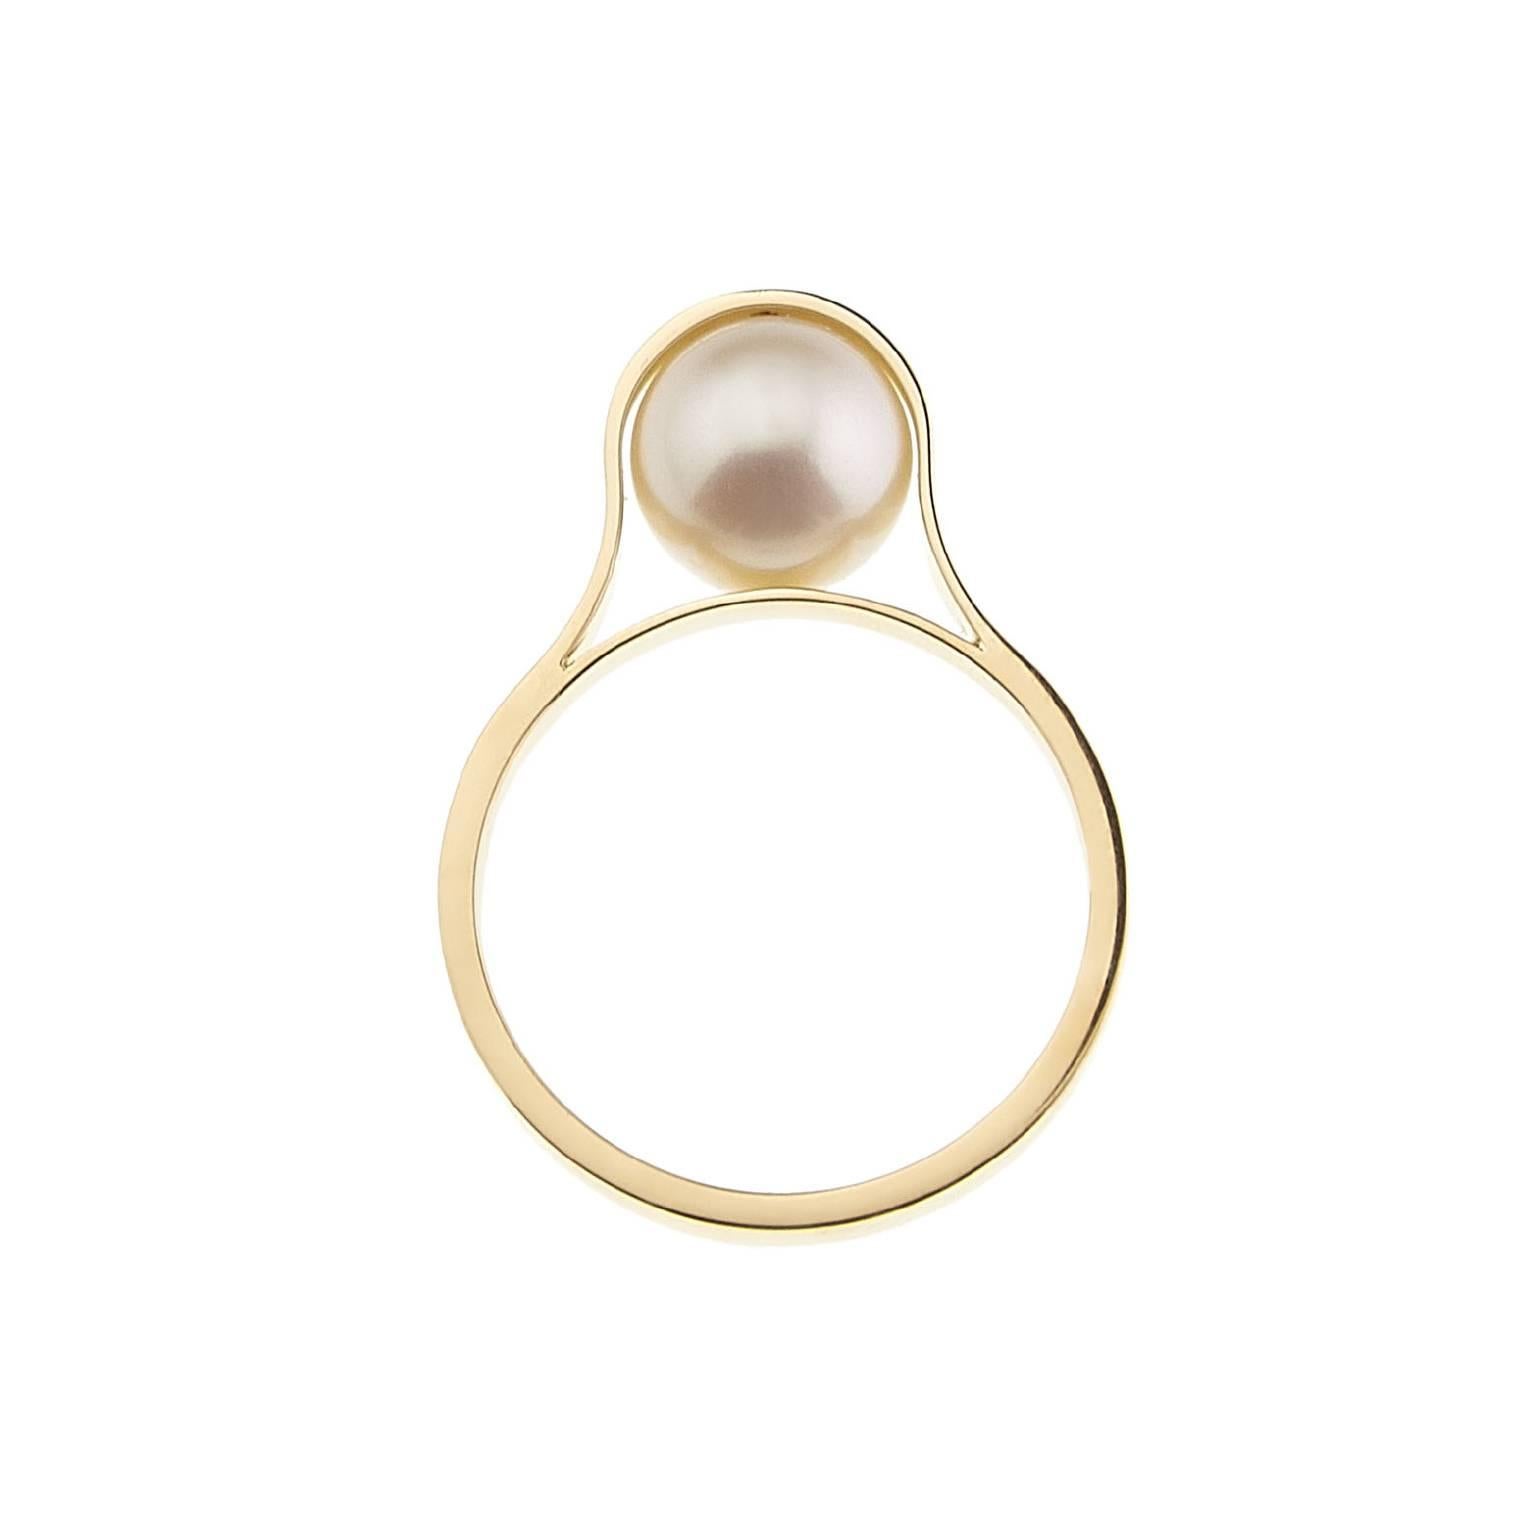 Realised by hand in Nathalie Jean's atelier, Nakkar Ring pays homage to the pearl, a symbol of divinity, royalty and luxury that has fascinated and inspired since the dawn of time. A simple 18 karat gold band encircles the precious sphere to create